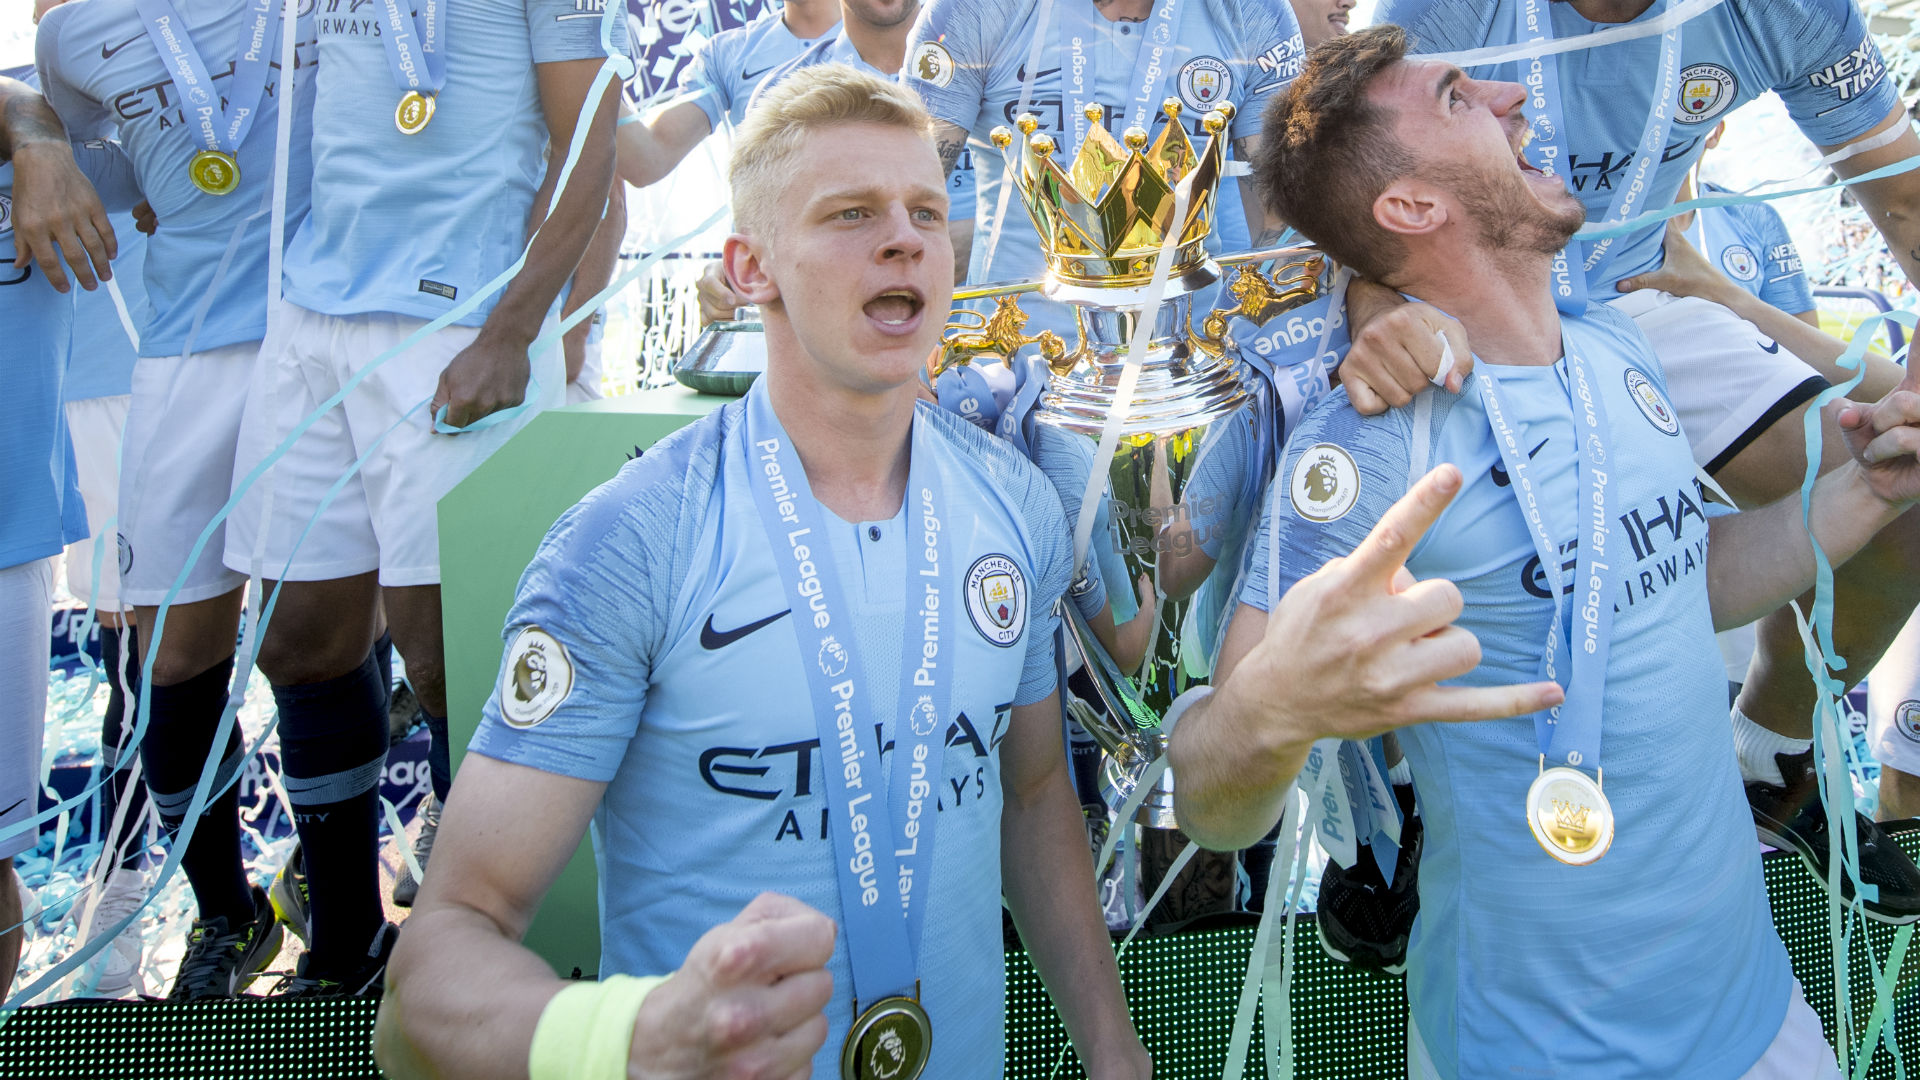 For many the FA Cup has lost some of its charm in recent years, but Oleksandr Zinchenko still sees it with the wonder he did as a child.